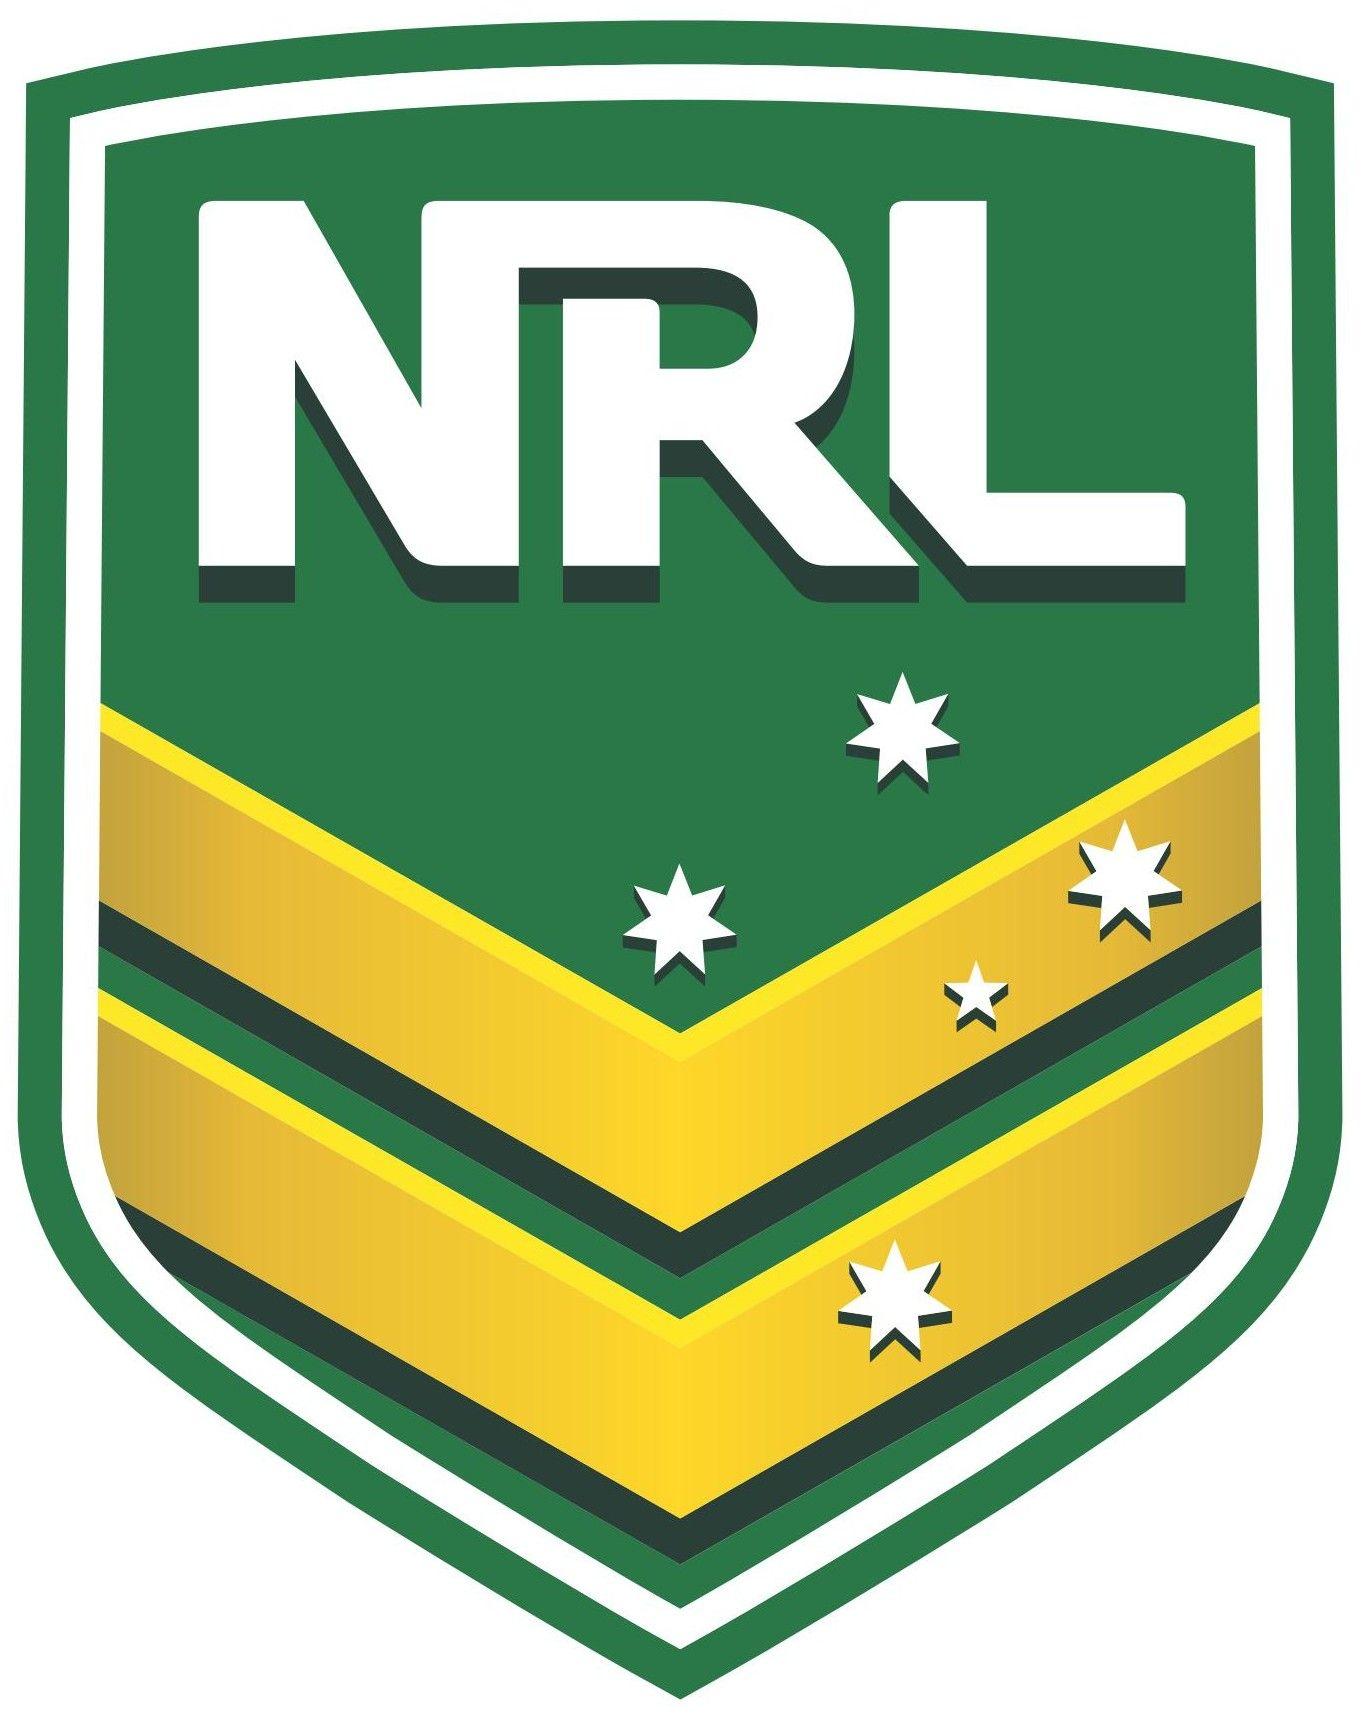 Australia Rugby Logo - NRL Australia (National Rugby League) | Logos - Other Sports | Rugby ...